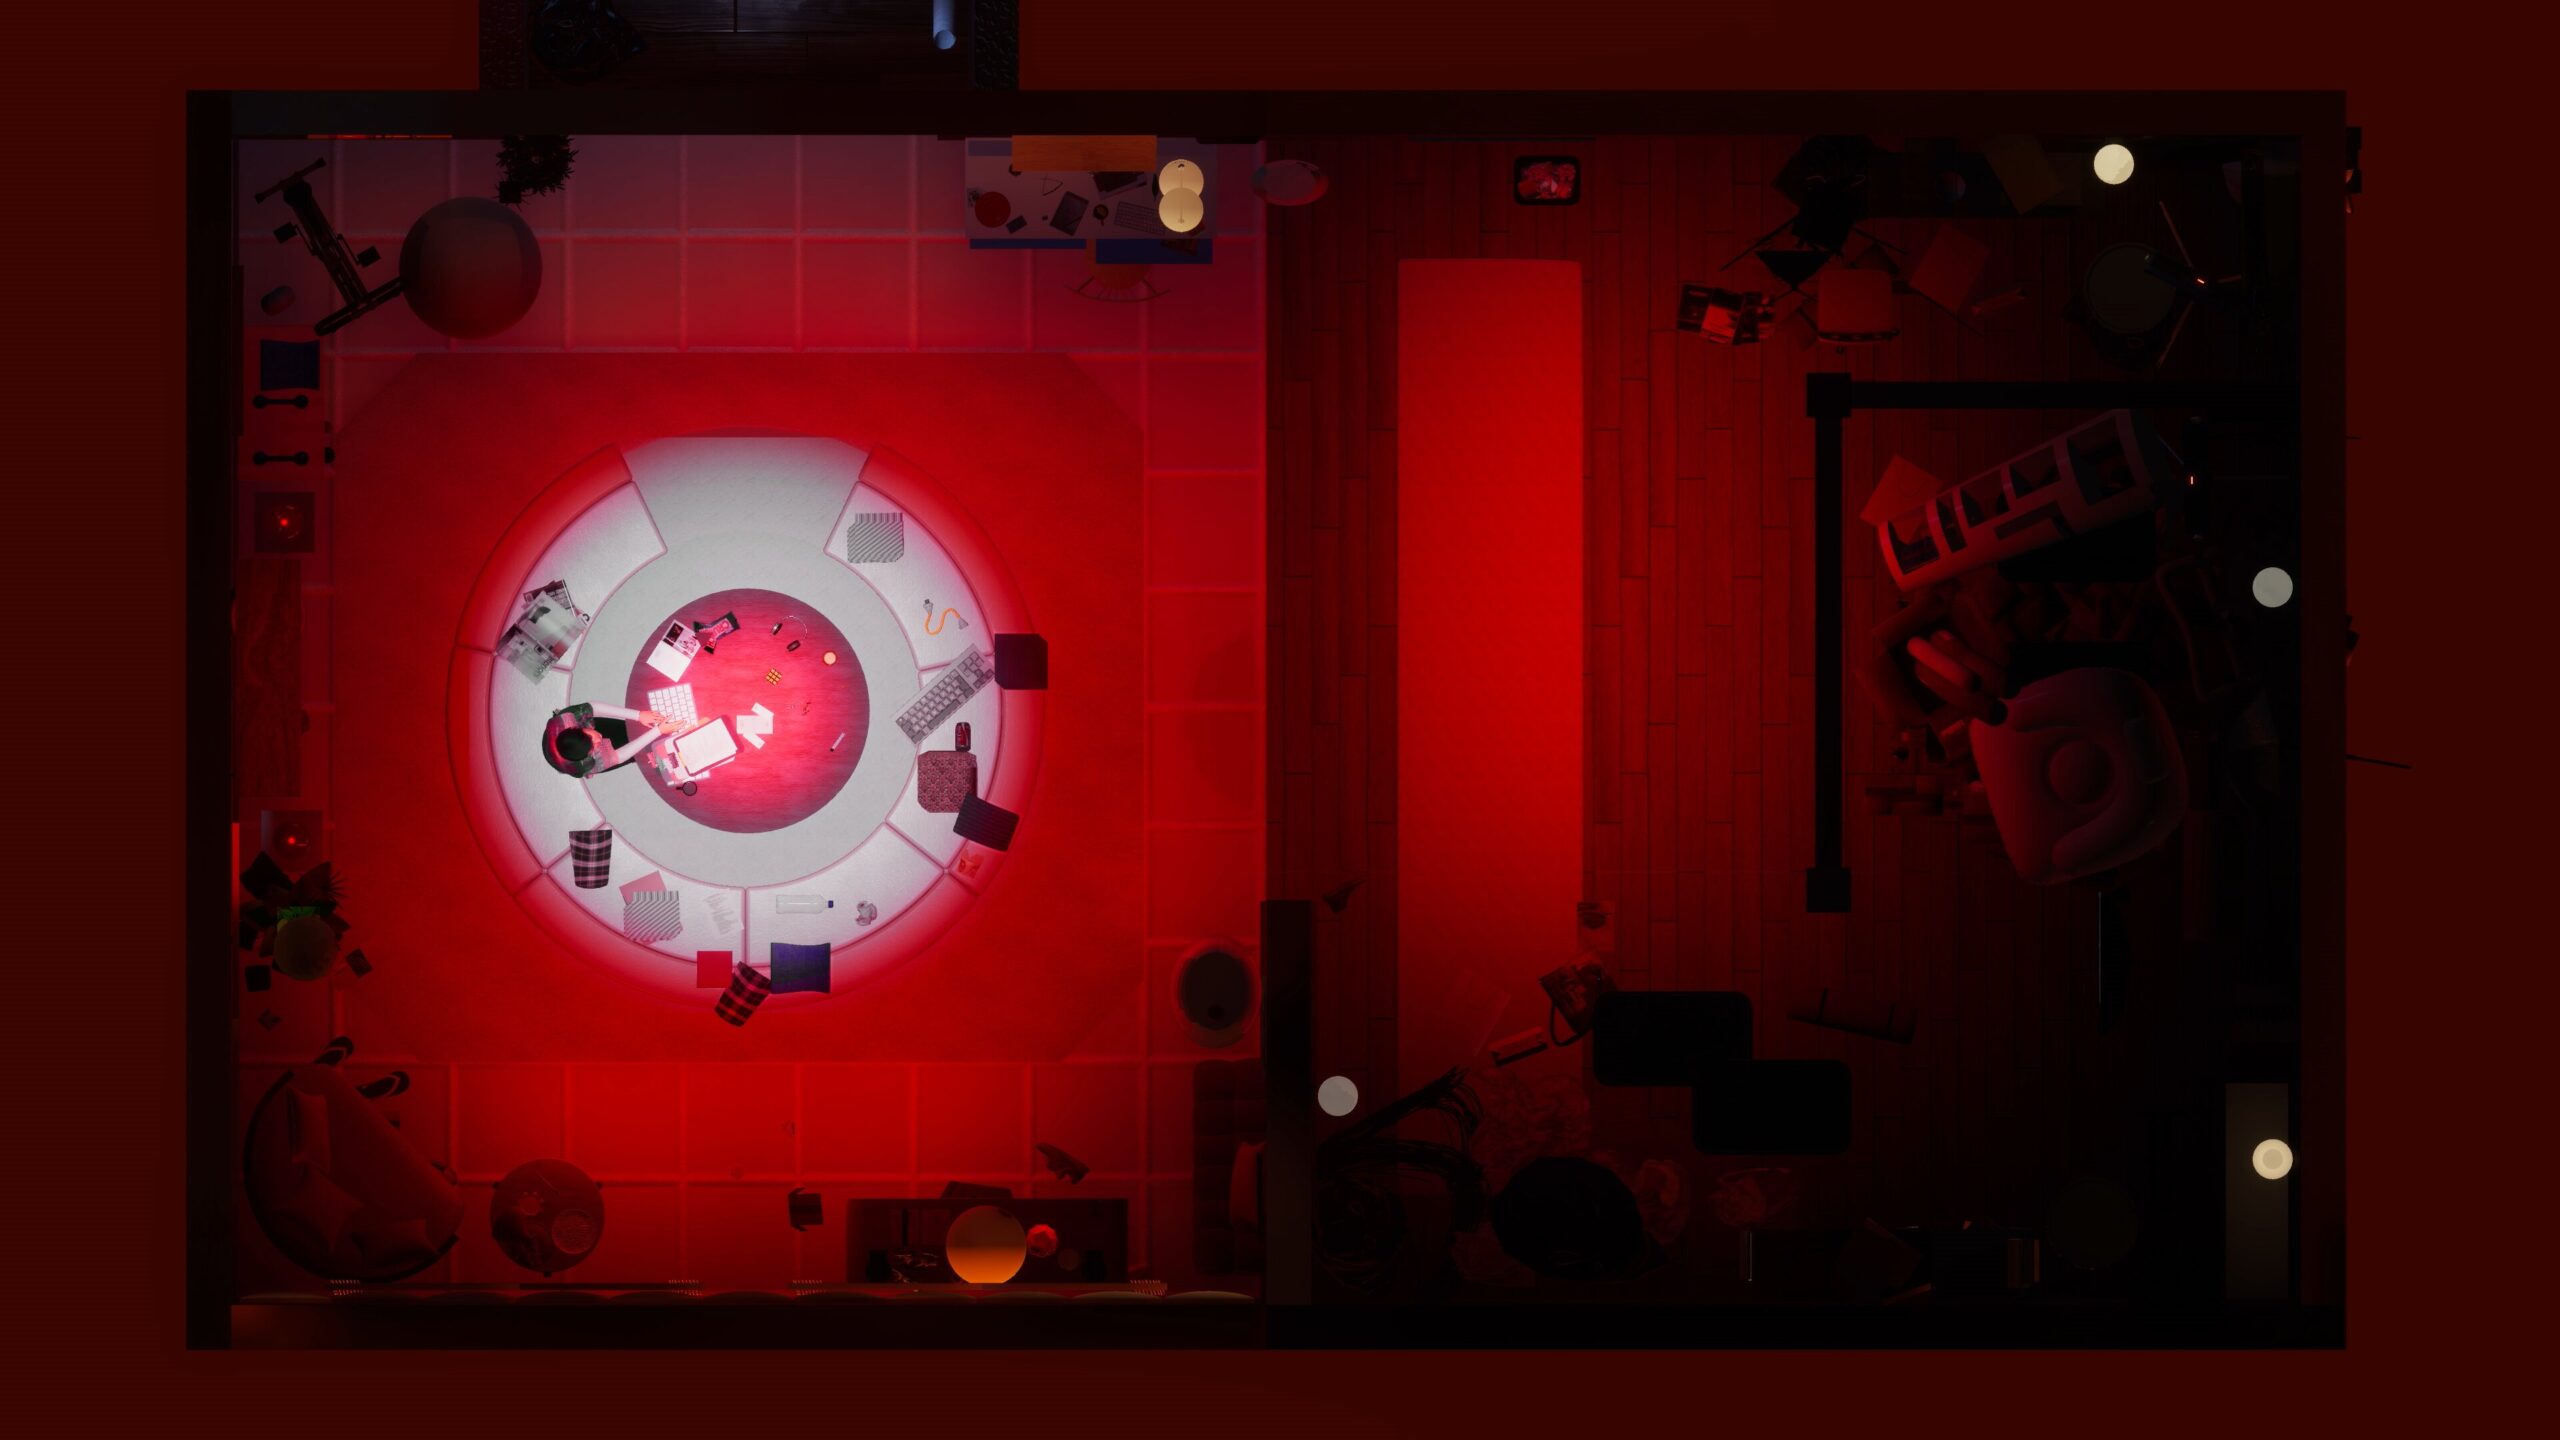 Image of a red screen depicting an aerial view of a circular table that a small figure is sitting at, surrounded by less-focused room clutter.